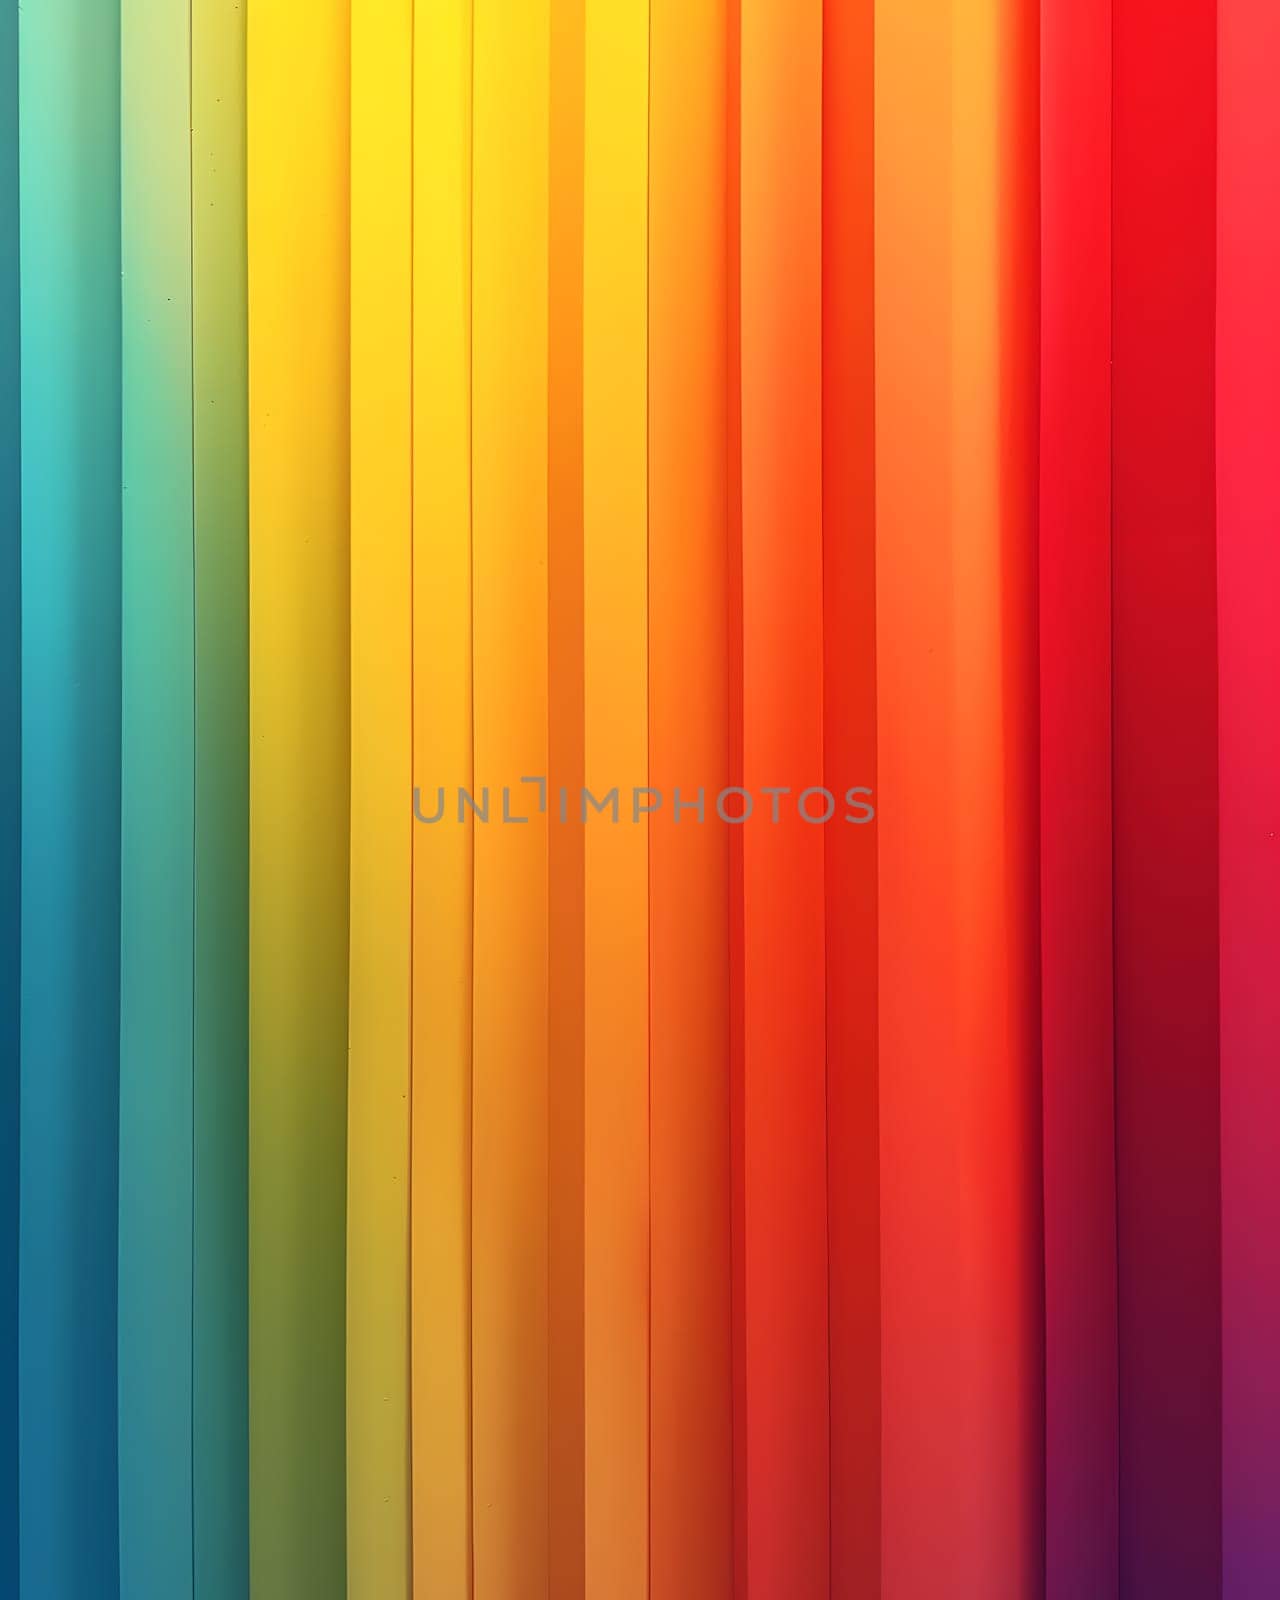 Vibrant rainbow colors in a close up of a curtain featuring hues of orange, amber, magenta, peach, and electric blue in a rectangular pattern. A true piece of art